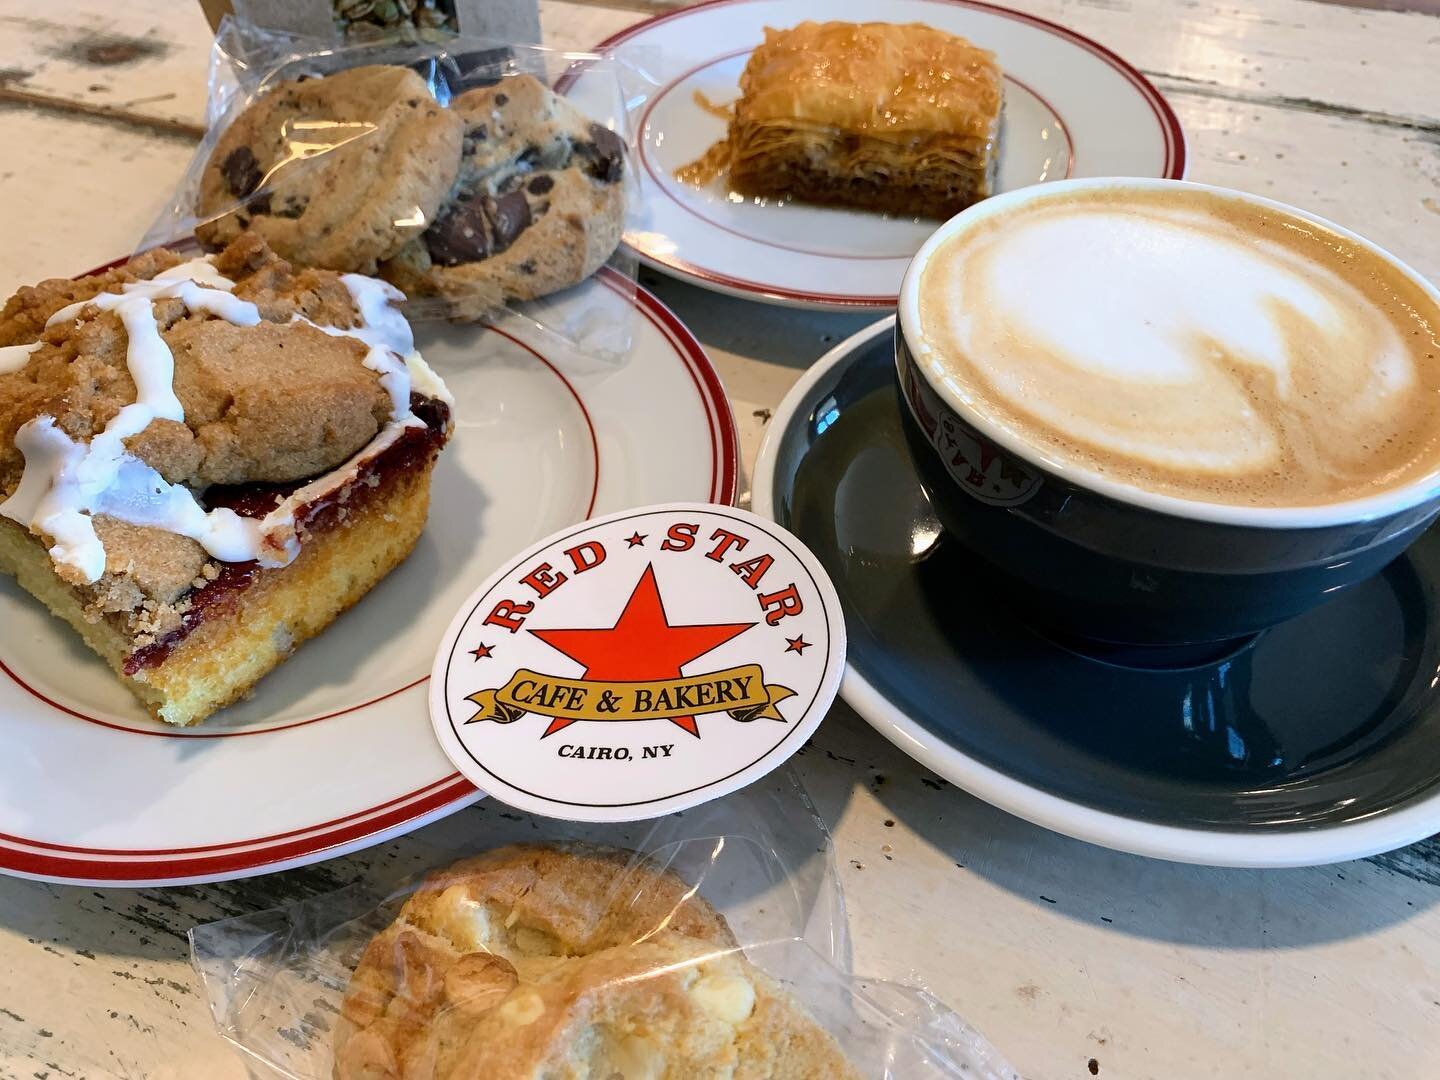 New shop alert - Red Star Cafe &amp; Bakery has great coffee and delicious homemade treats. The baklava is a MUST! #cairony #cometocatskill